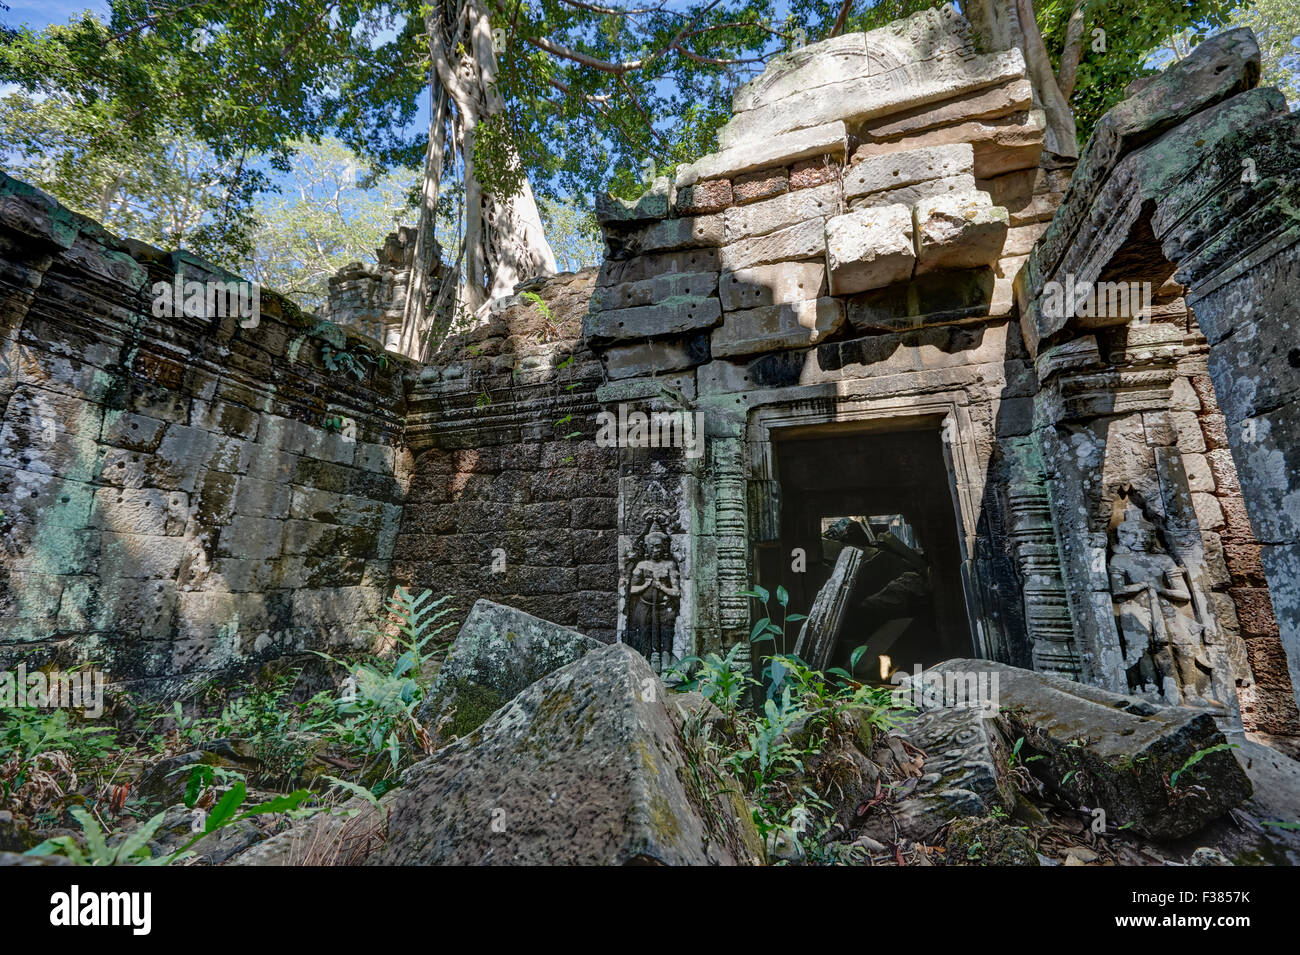 Ta Prohm temple. Angkor Archaeological Park, Siem Reap Province, Cambodia. Stock Photo